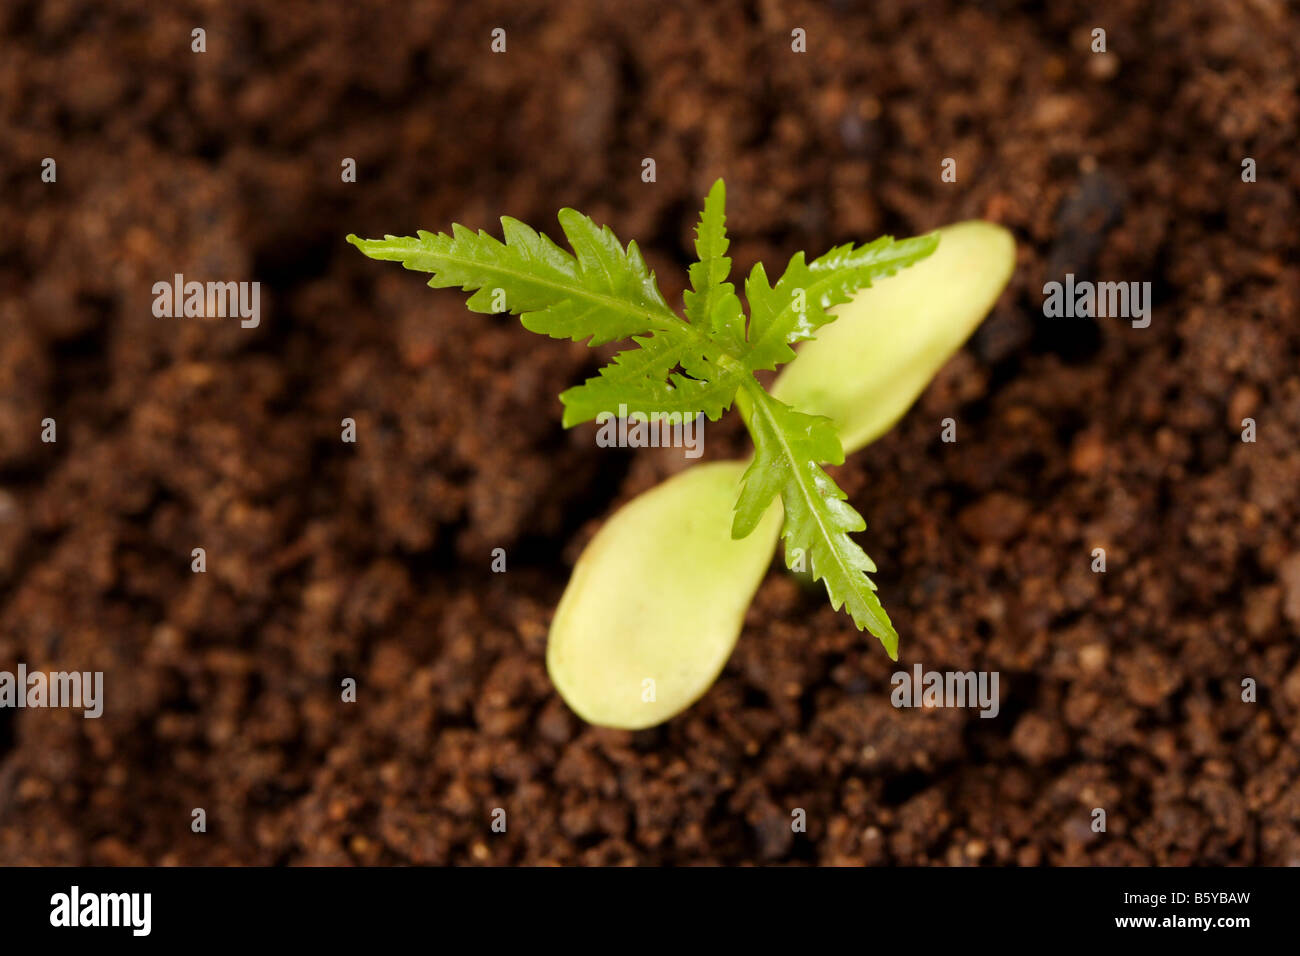 Seedling growing out of soil Stock Photo